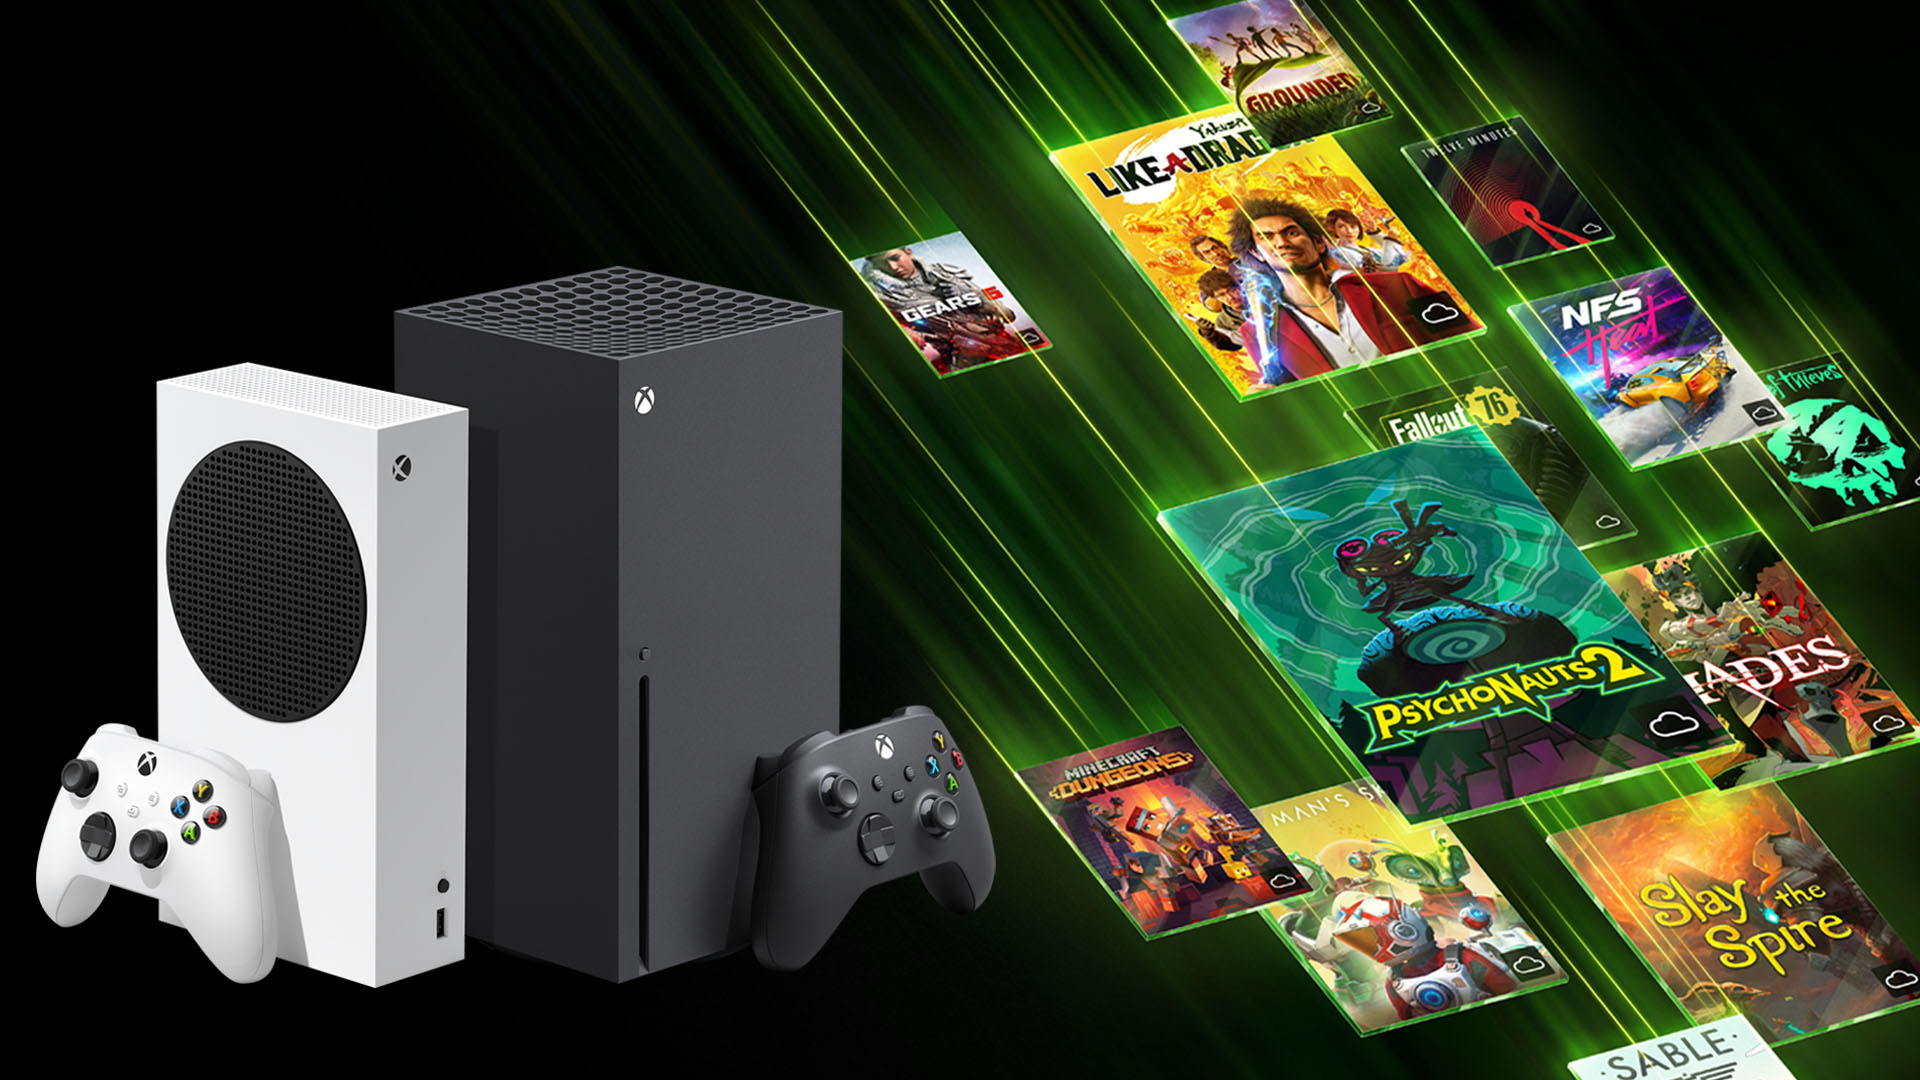 Xbox Facing Existential Threat As Some Publishers Express Worry About “Flatlining” Sales